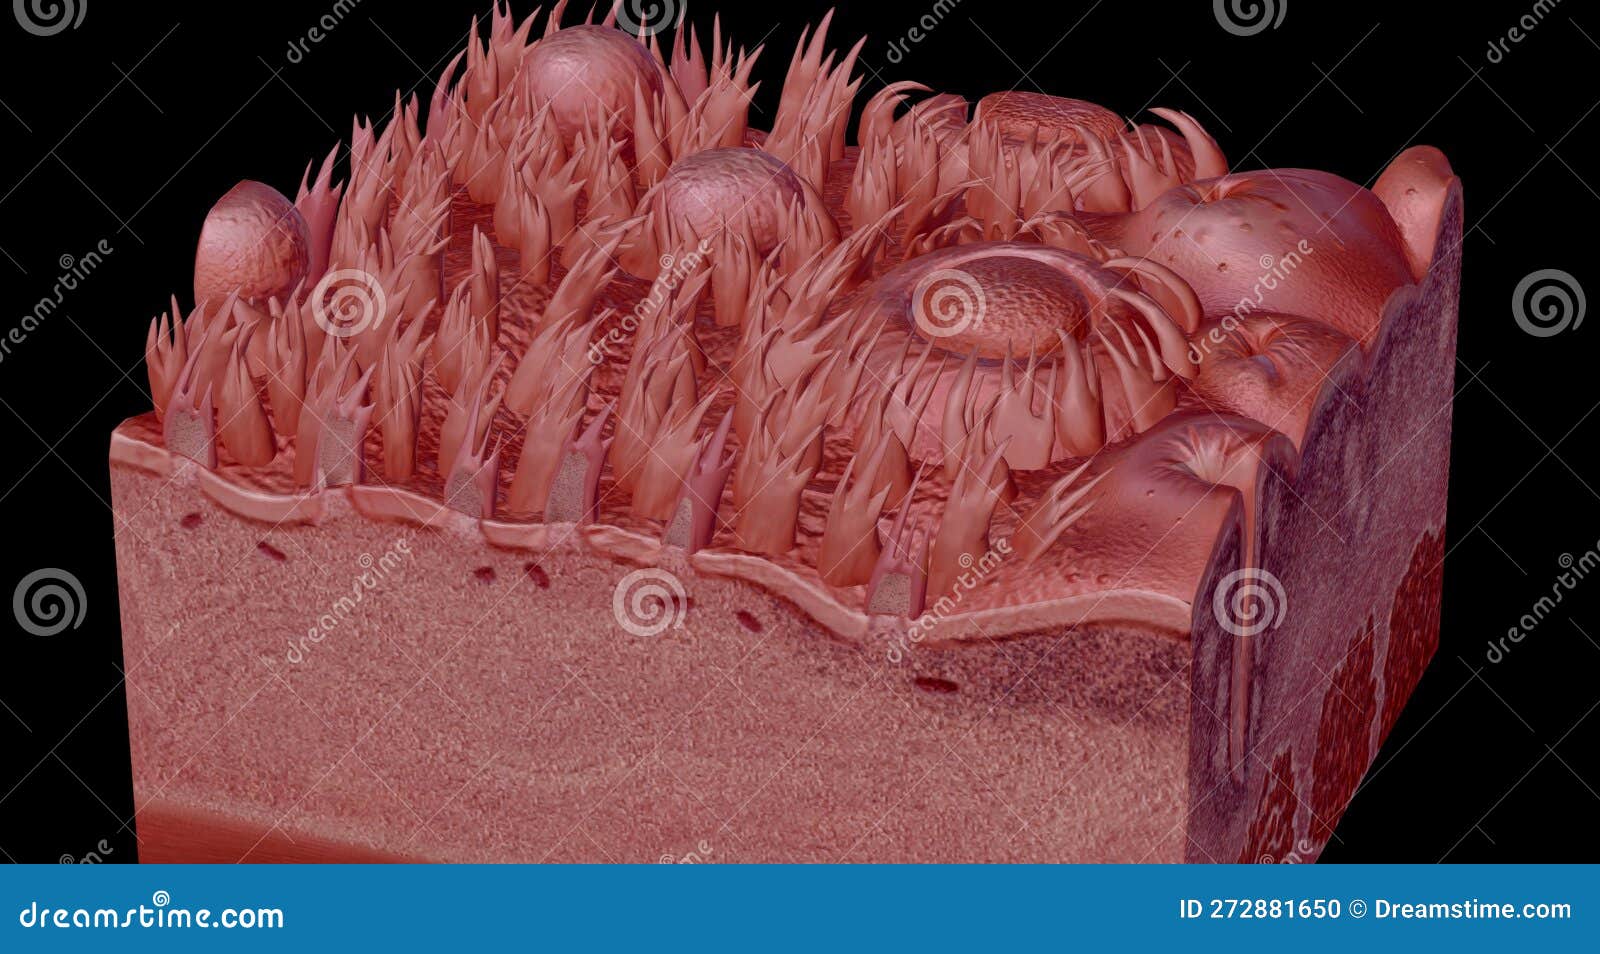 human tongue cross section showing its different anatomical ps